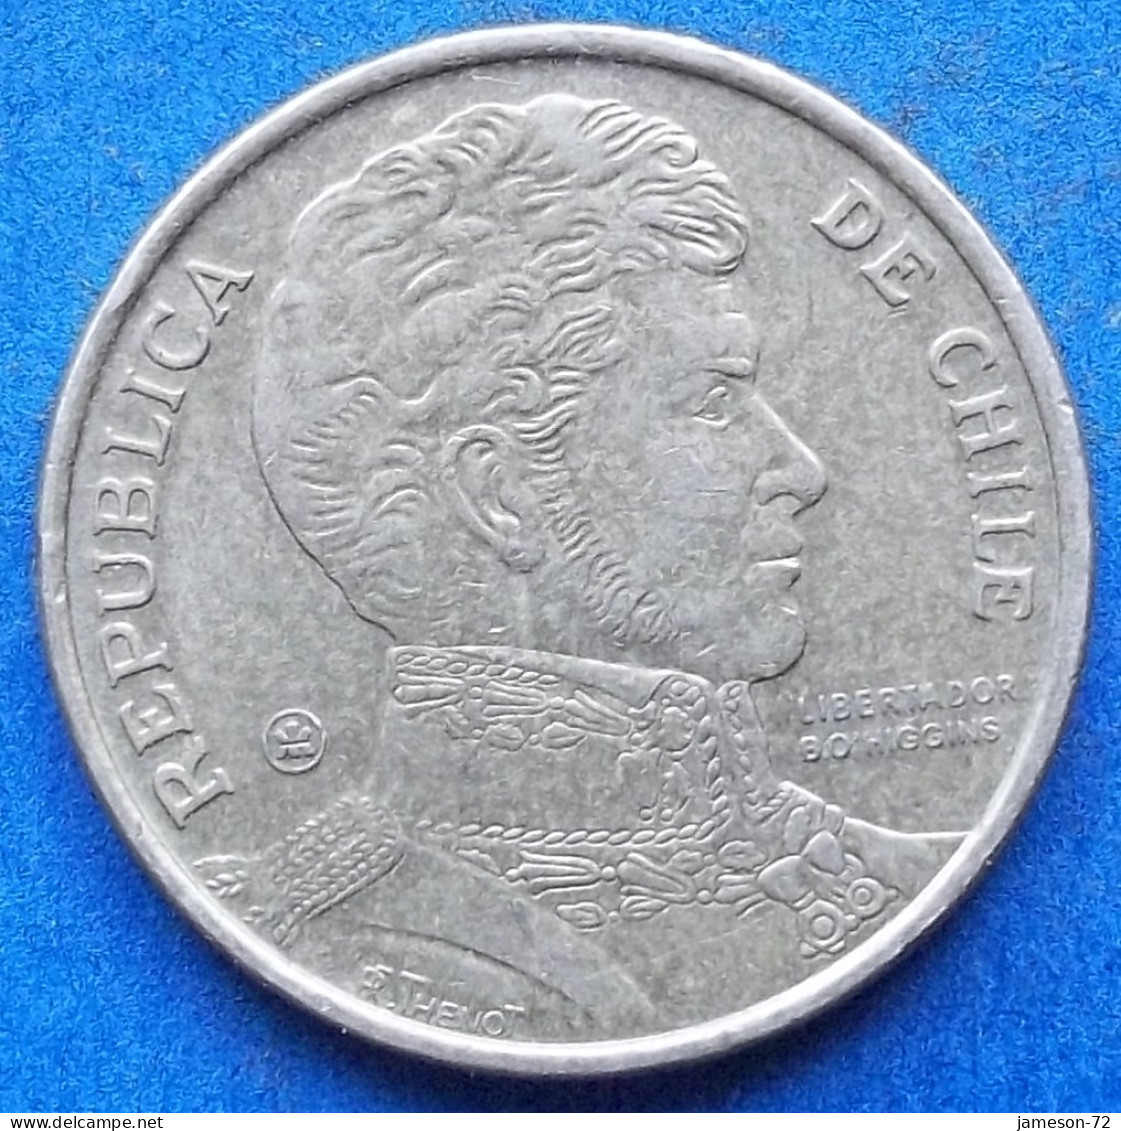 CHILE - 10 Pesos 2007 KM# 228.2 Monetary Reform (1975) - Edelweiss Coins - Chile